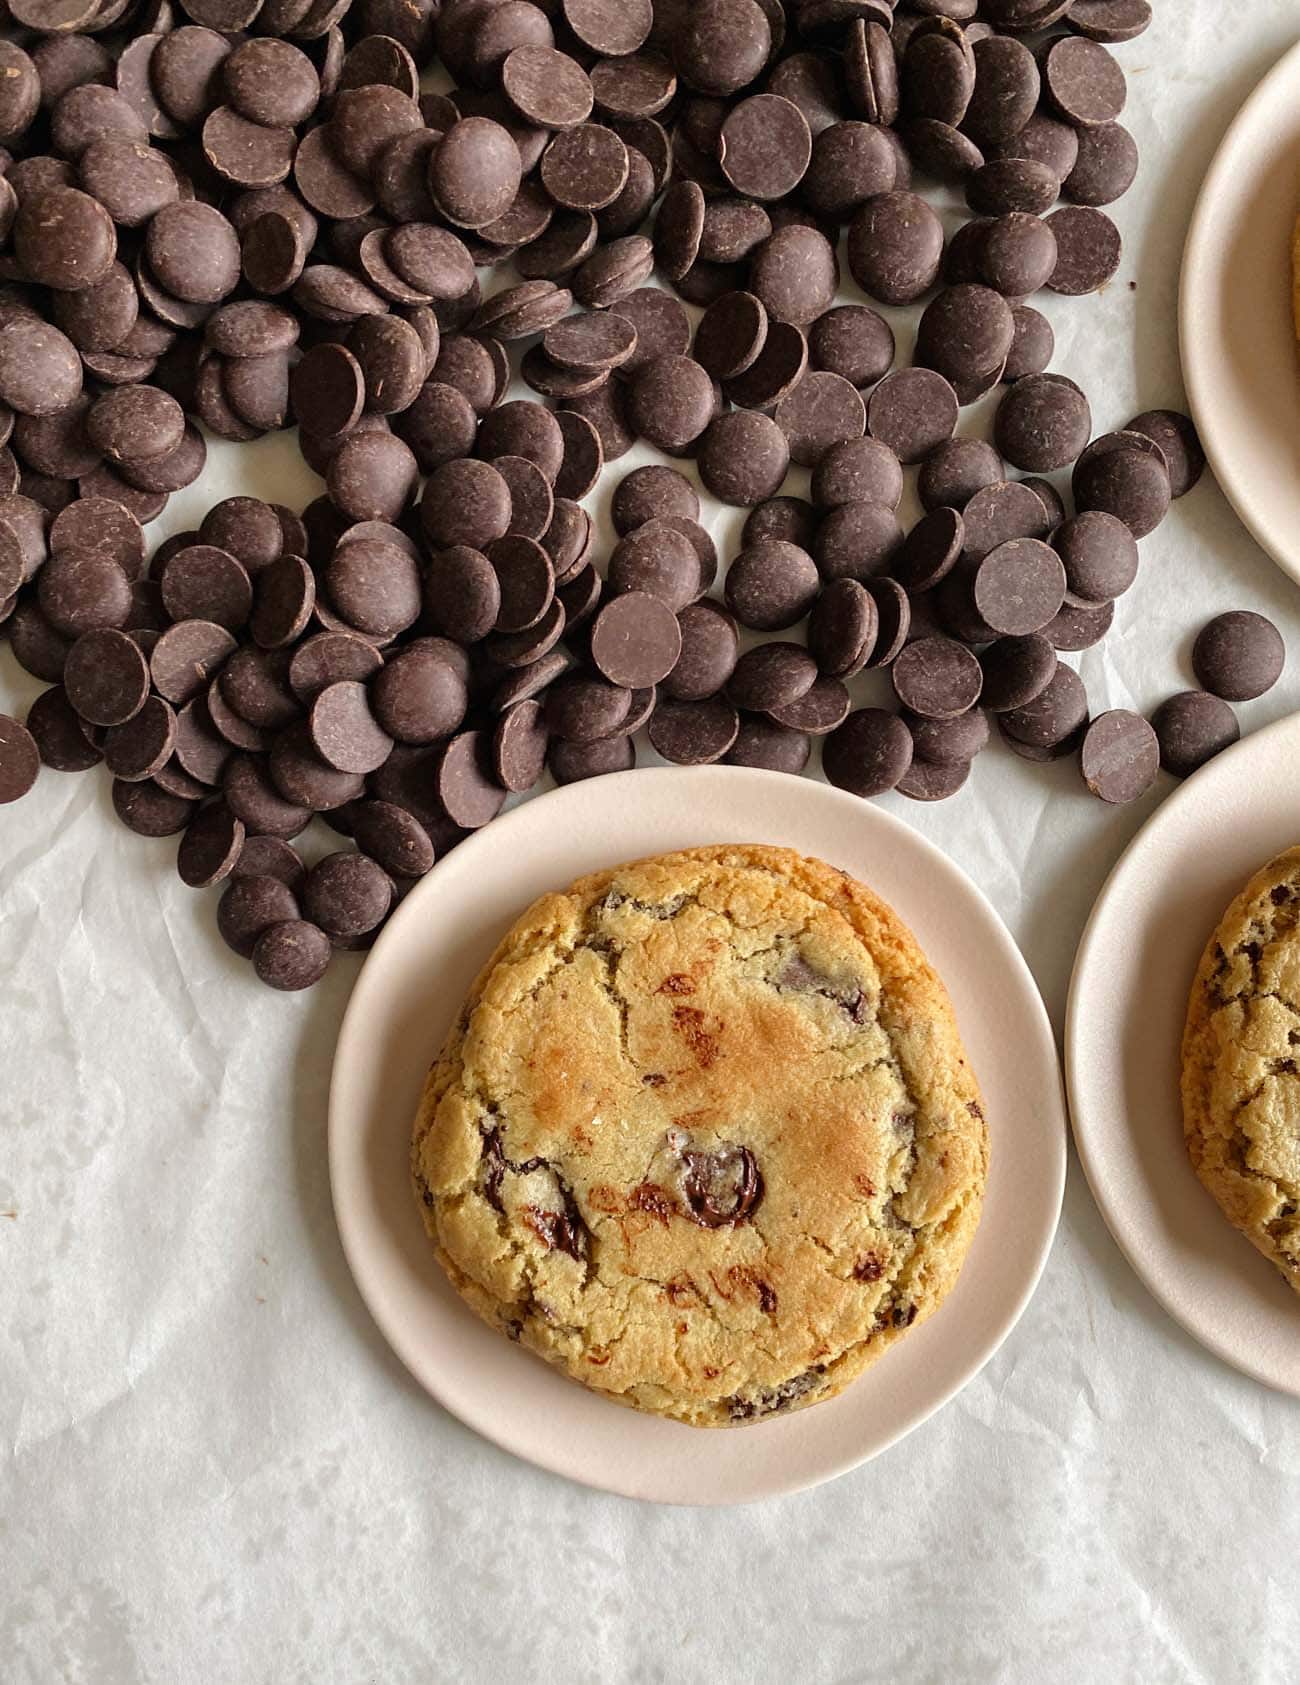 https://www.thevanillabeanblog.com/wp-content/uploads/2022/08/perfect-chocolate-chip-cookies.jpg